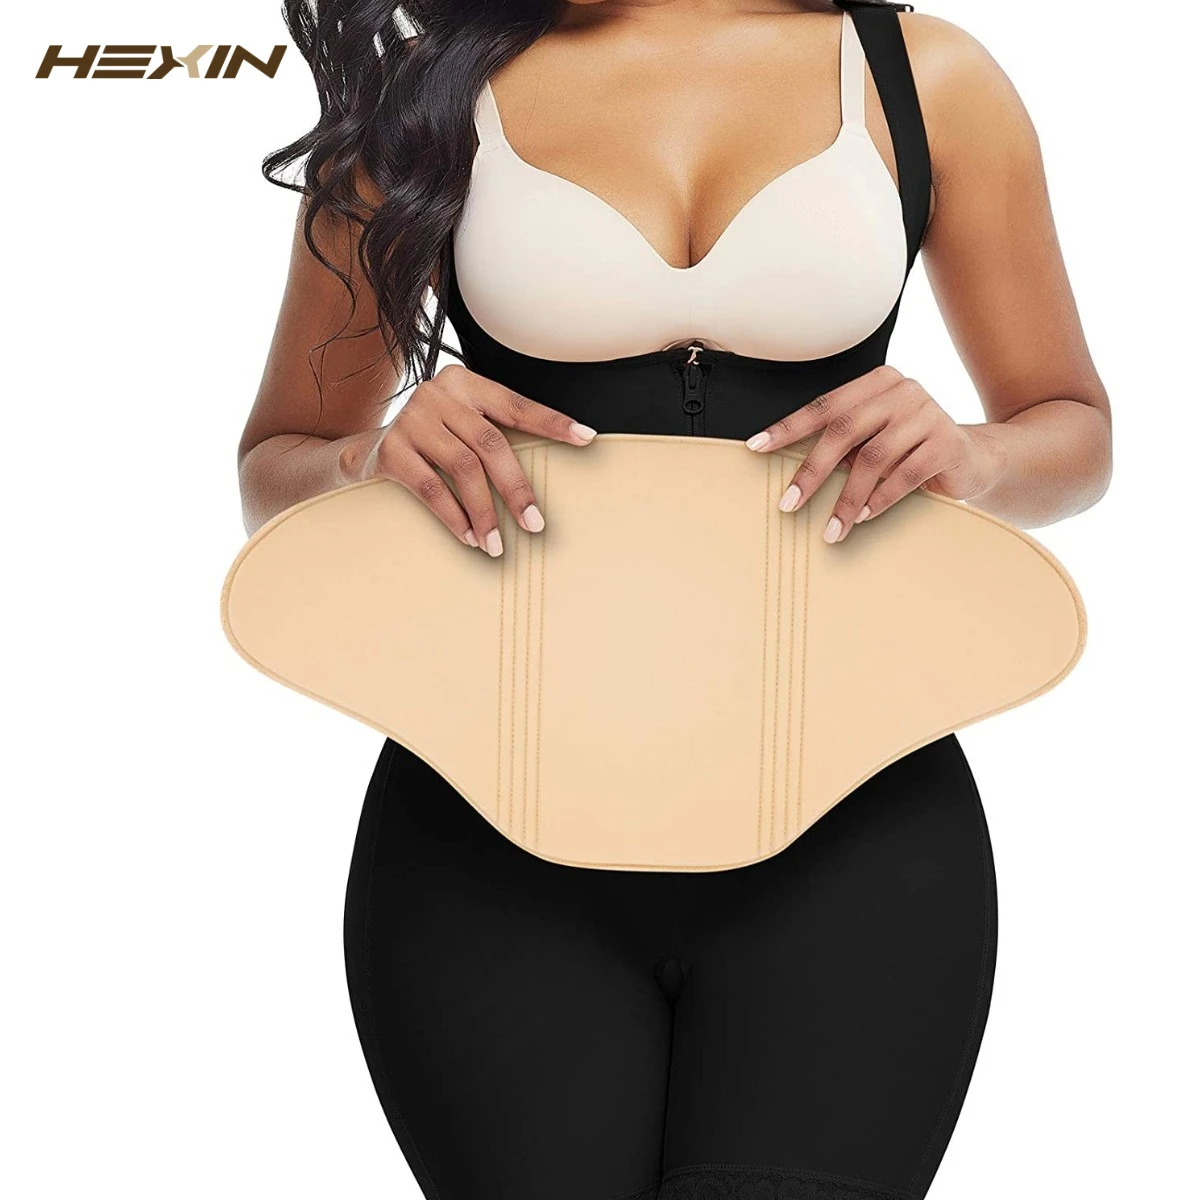 360 Lipo Foam Wrap Around Ab Board Post Surgery Flattening Abdominal  Compression Waist Belly Table For Liposuction Recovery